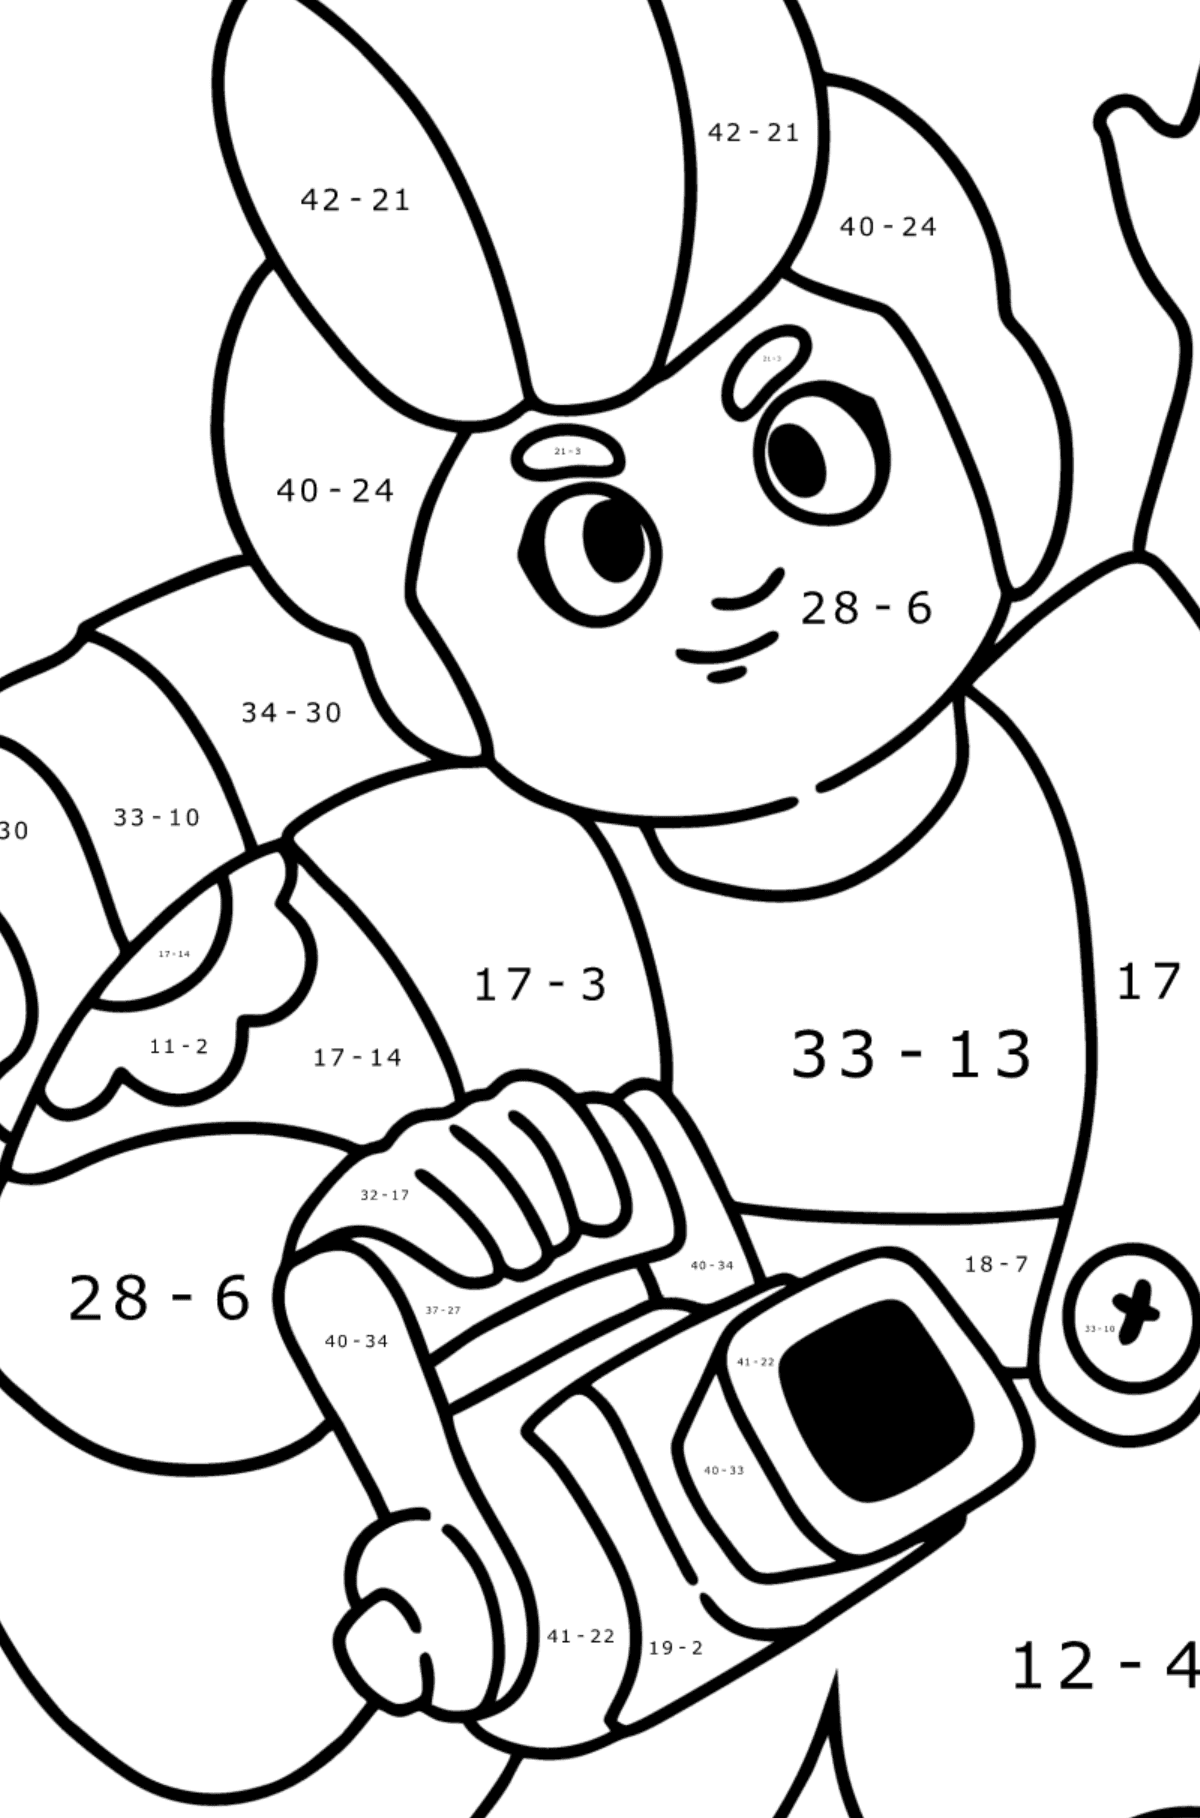 Brawl Stars Pam coloring page - Math Coloring - Subtraction for Kids